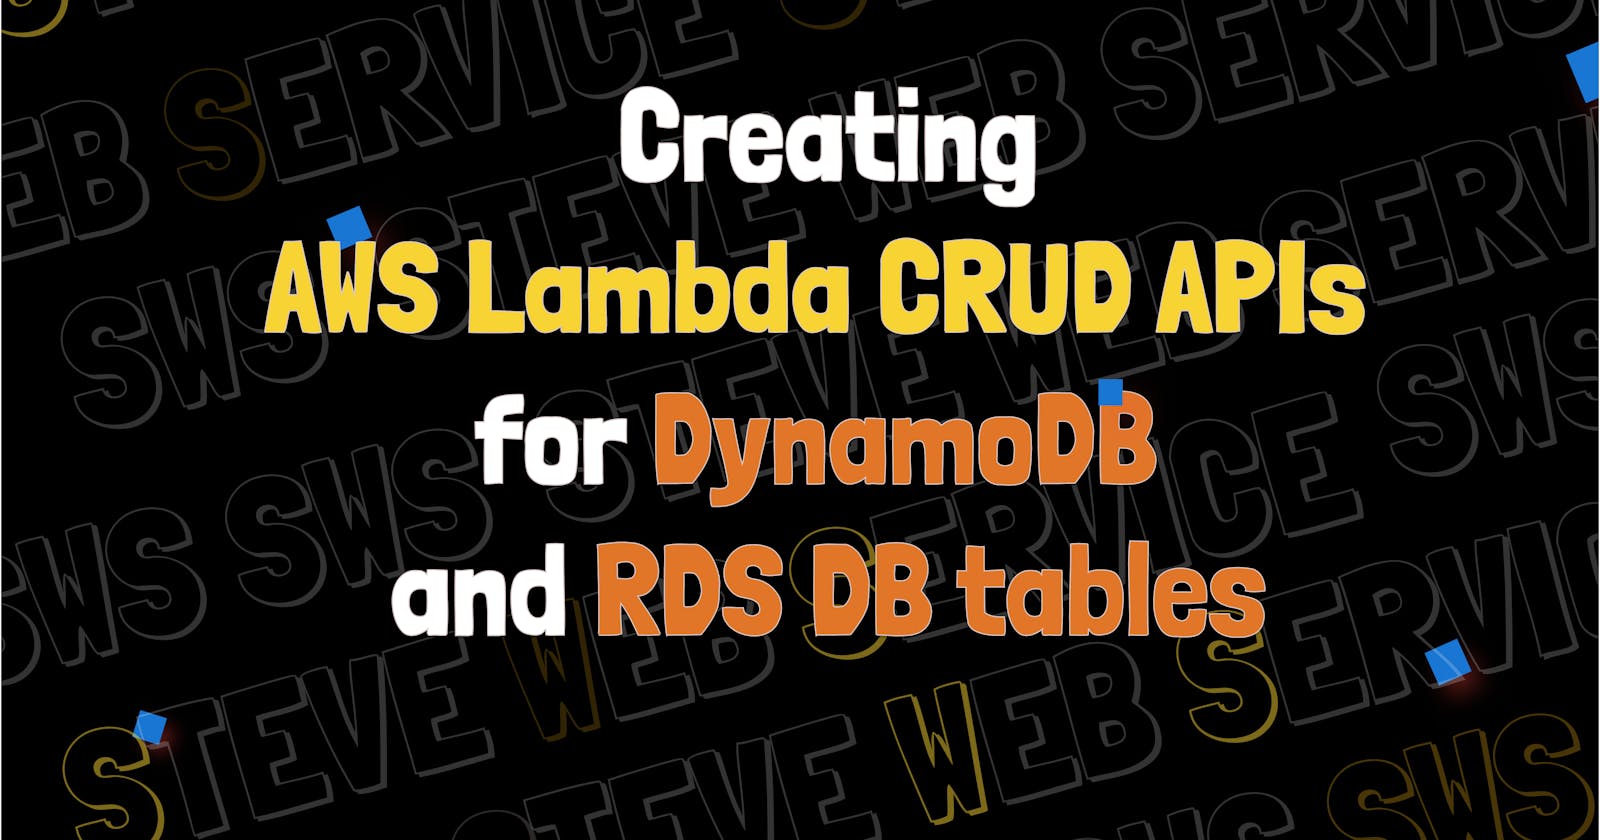 SWS Console: Creating AWS Lambda CRUD APIs for DynamoDB and RDS DB tables.